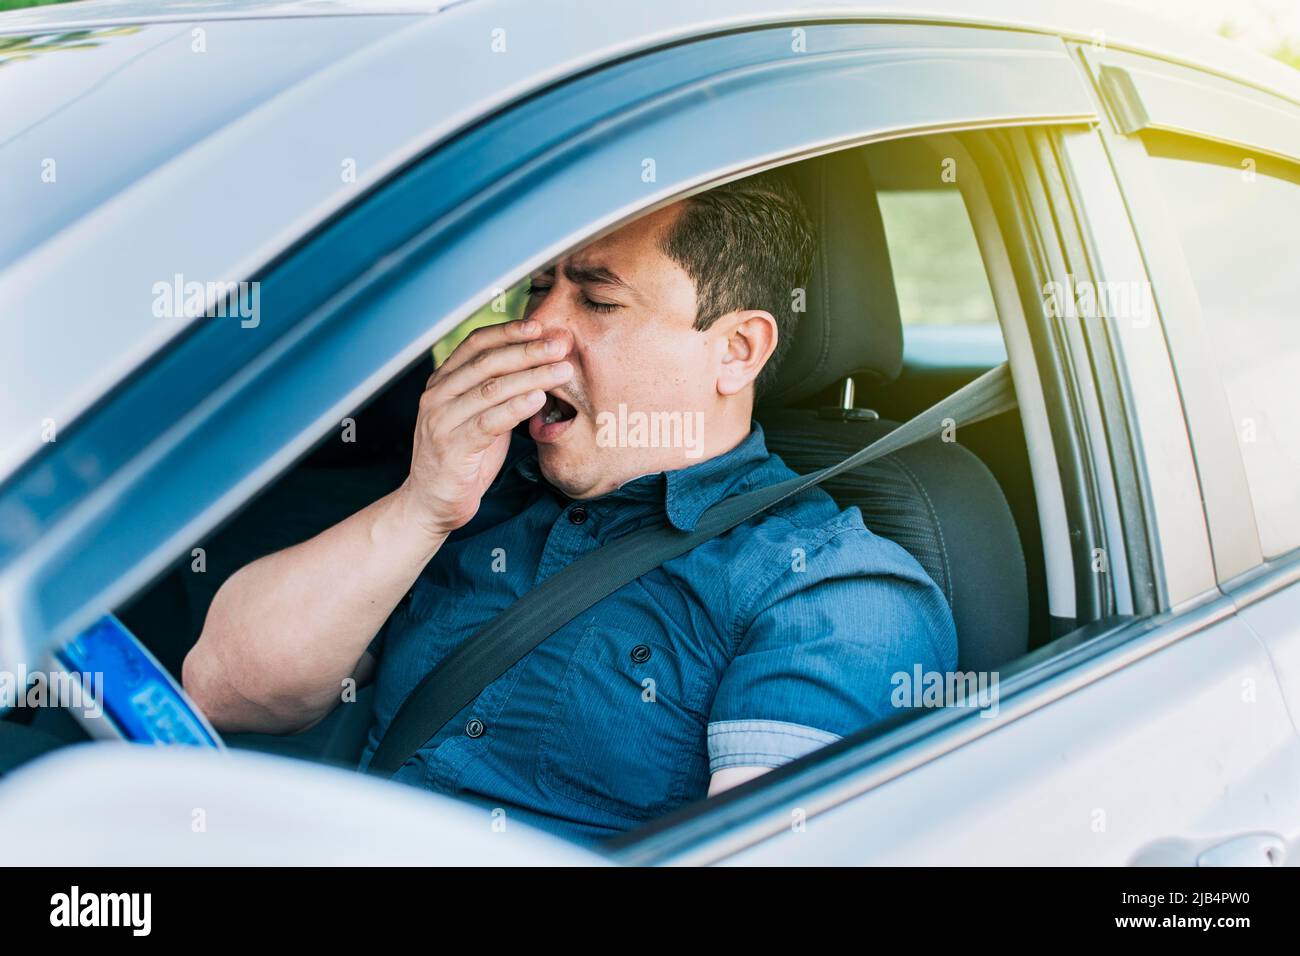 A sleepy driver at the wheel, a tired person while driving, Tired driver yawning, concept of man yawning while driving Stock Photo